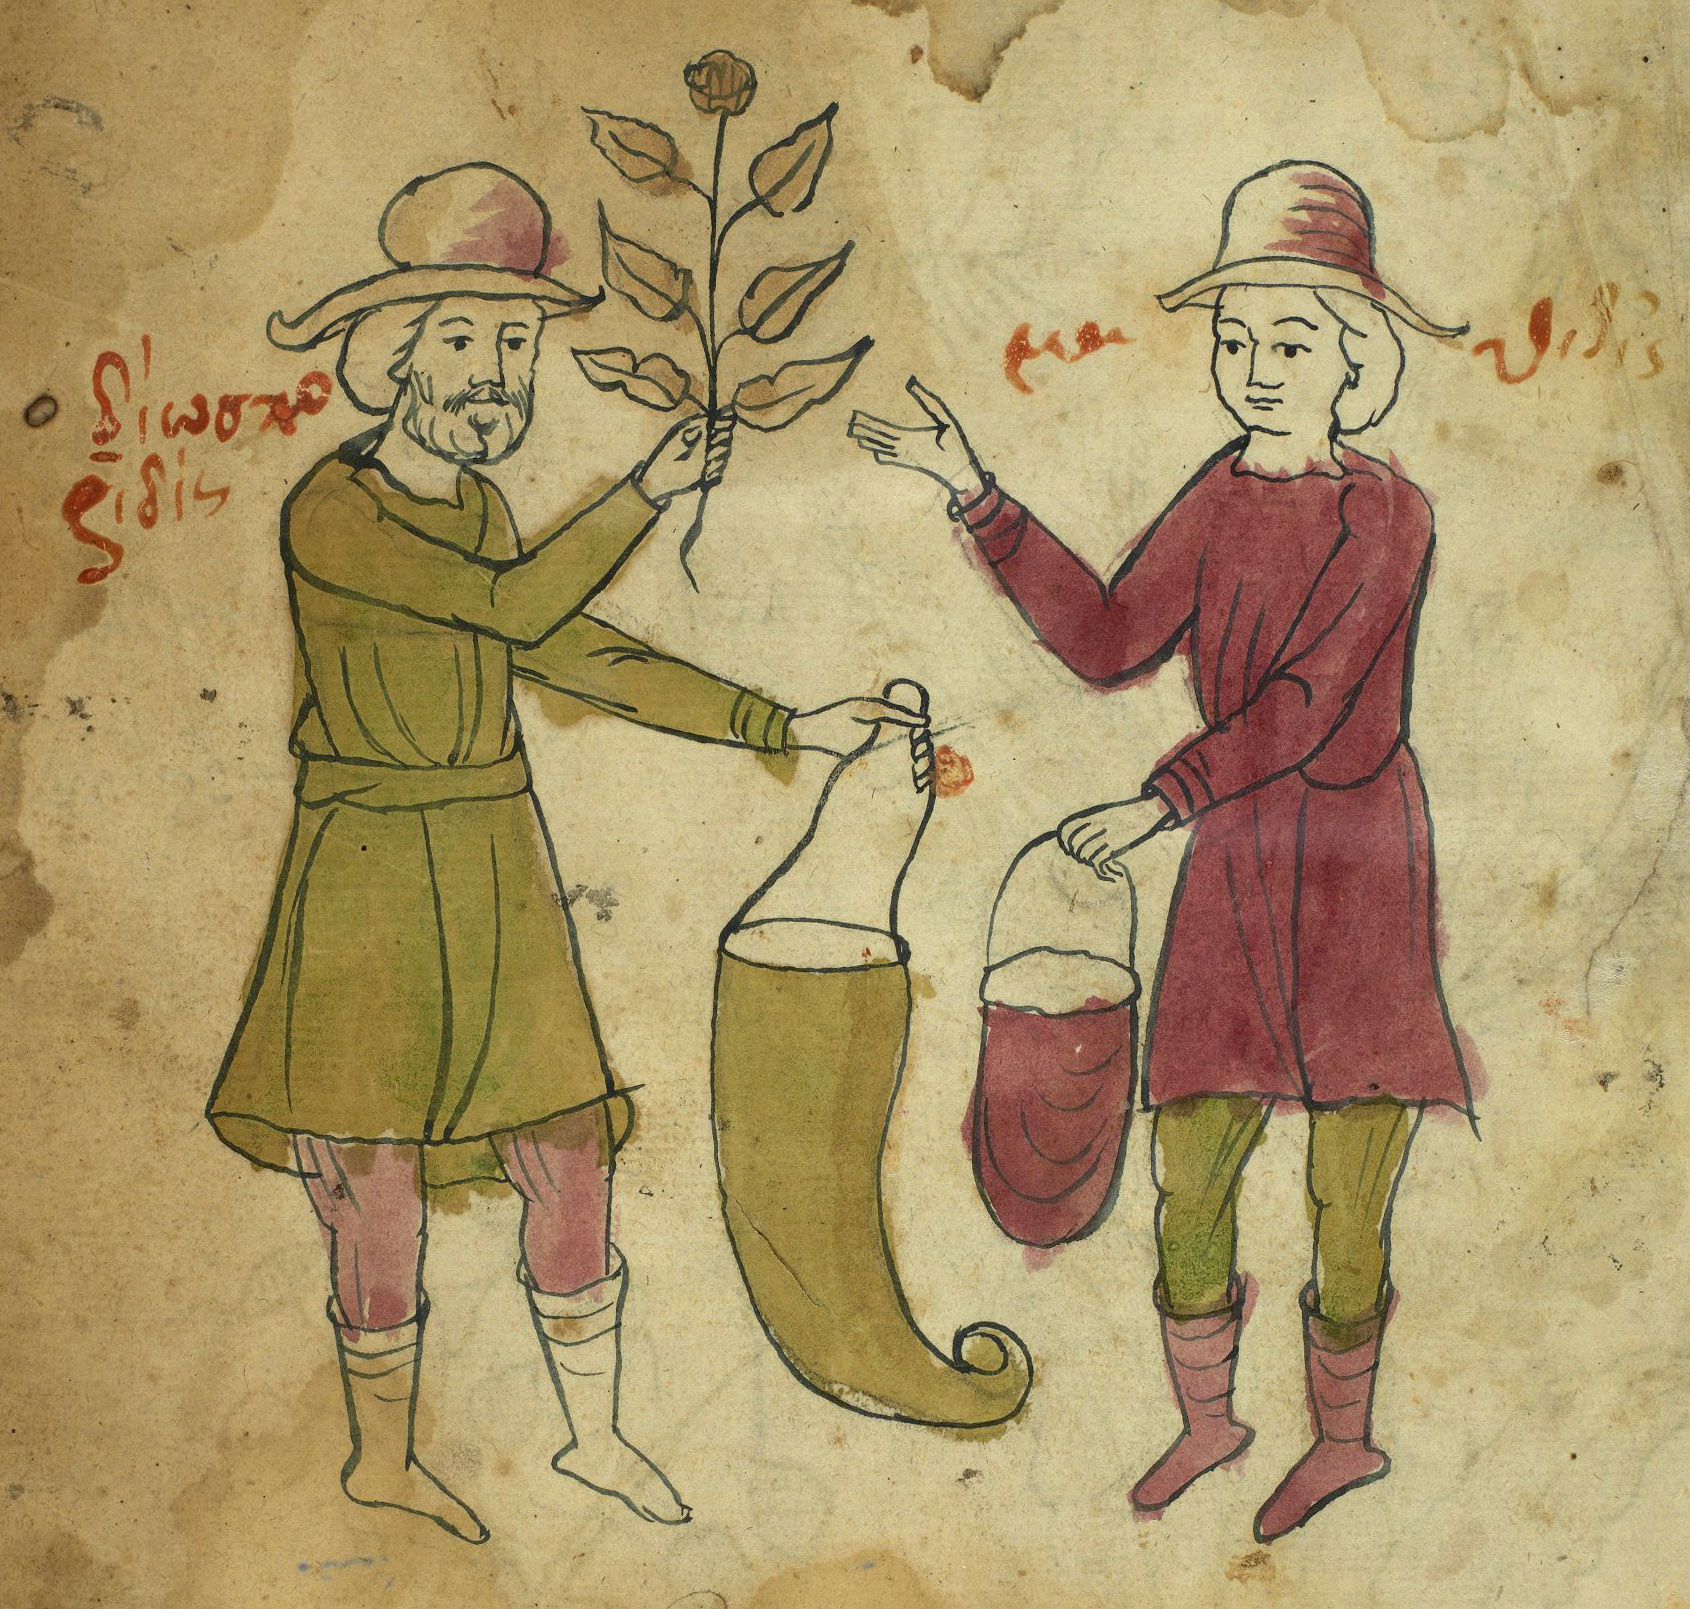 pen-and-wash illustration of Dioscorides and a companion collecting plants in bags 